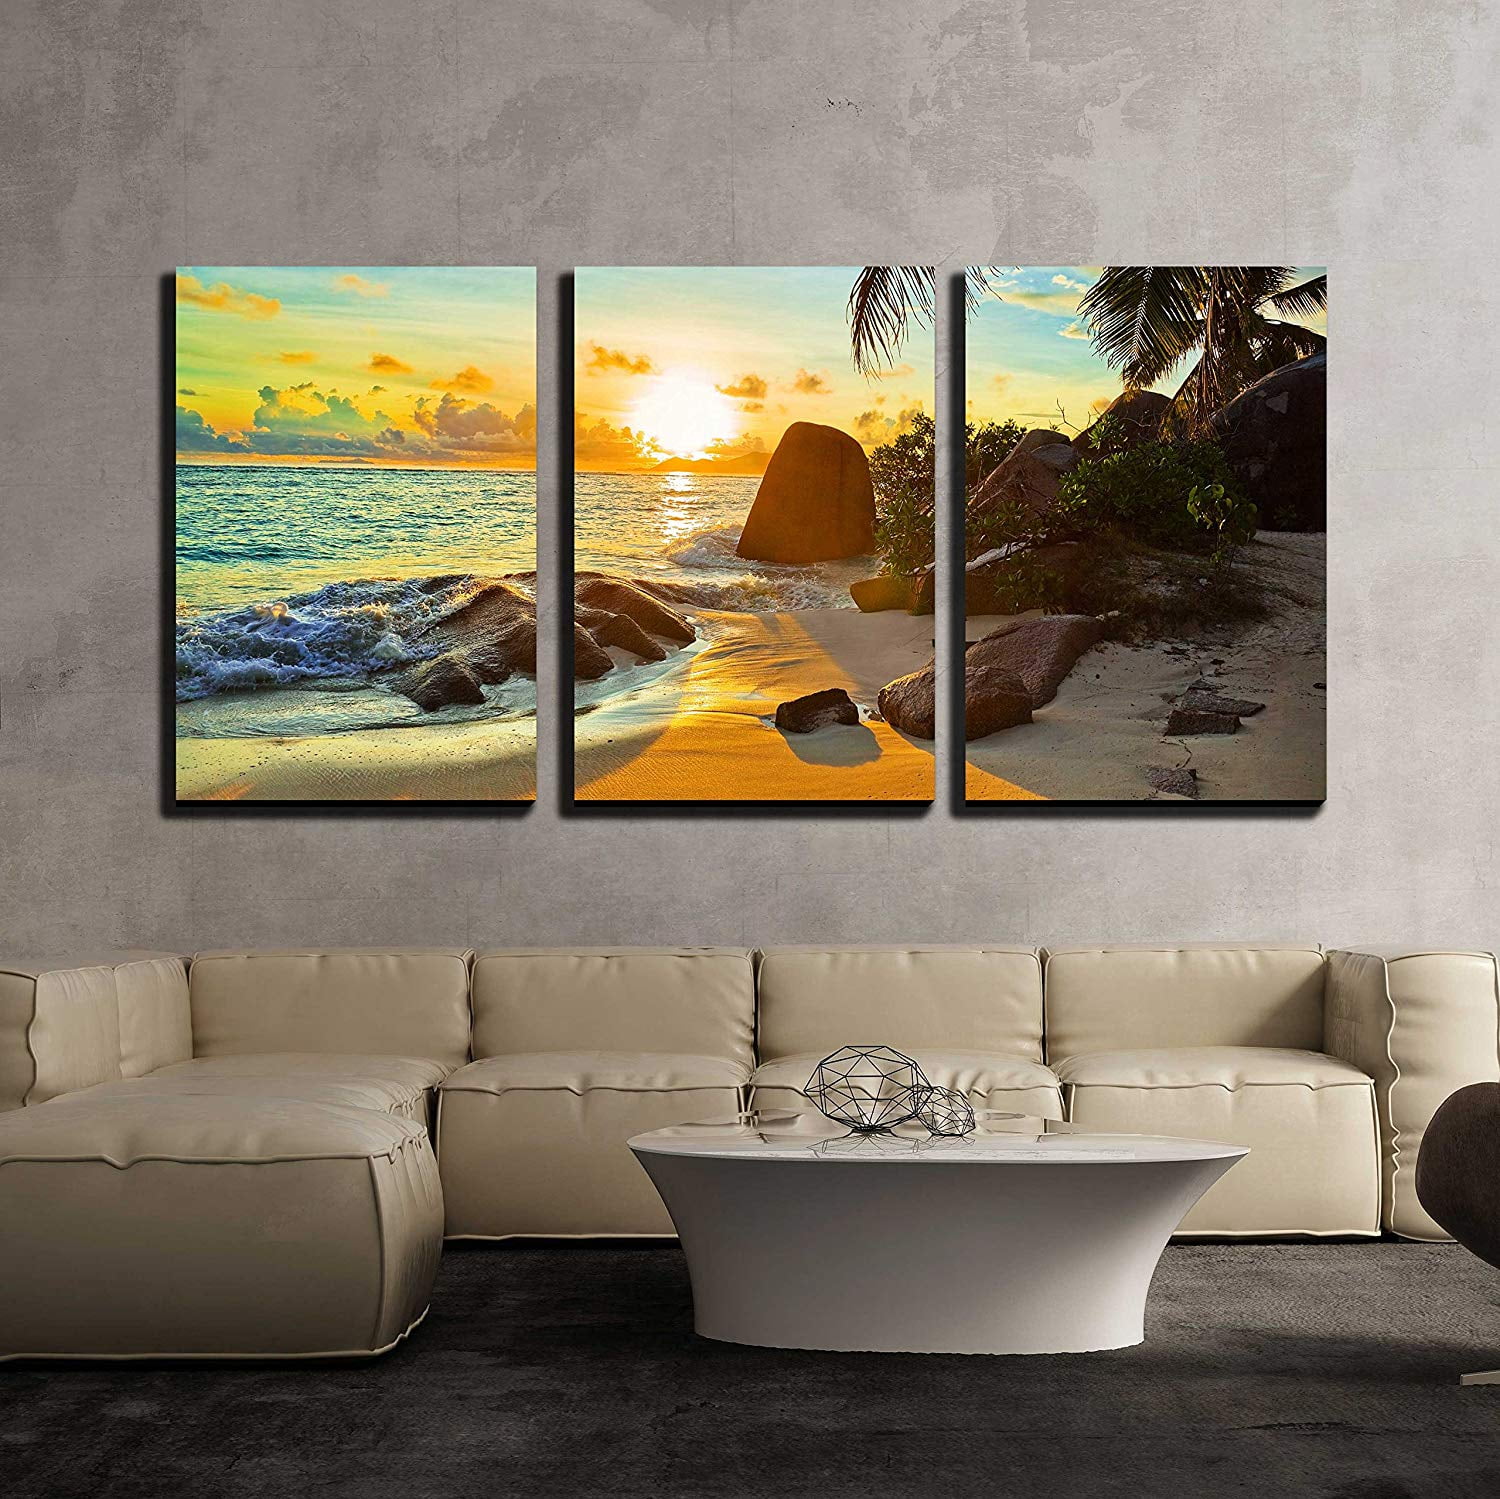 Ocean Waves Print on Canvas Painting Modern Seascape Ready to Hang for Home Living Room Bedroom Decoration Padsin Art Sunset Square Canvas Wall Art Painting 